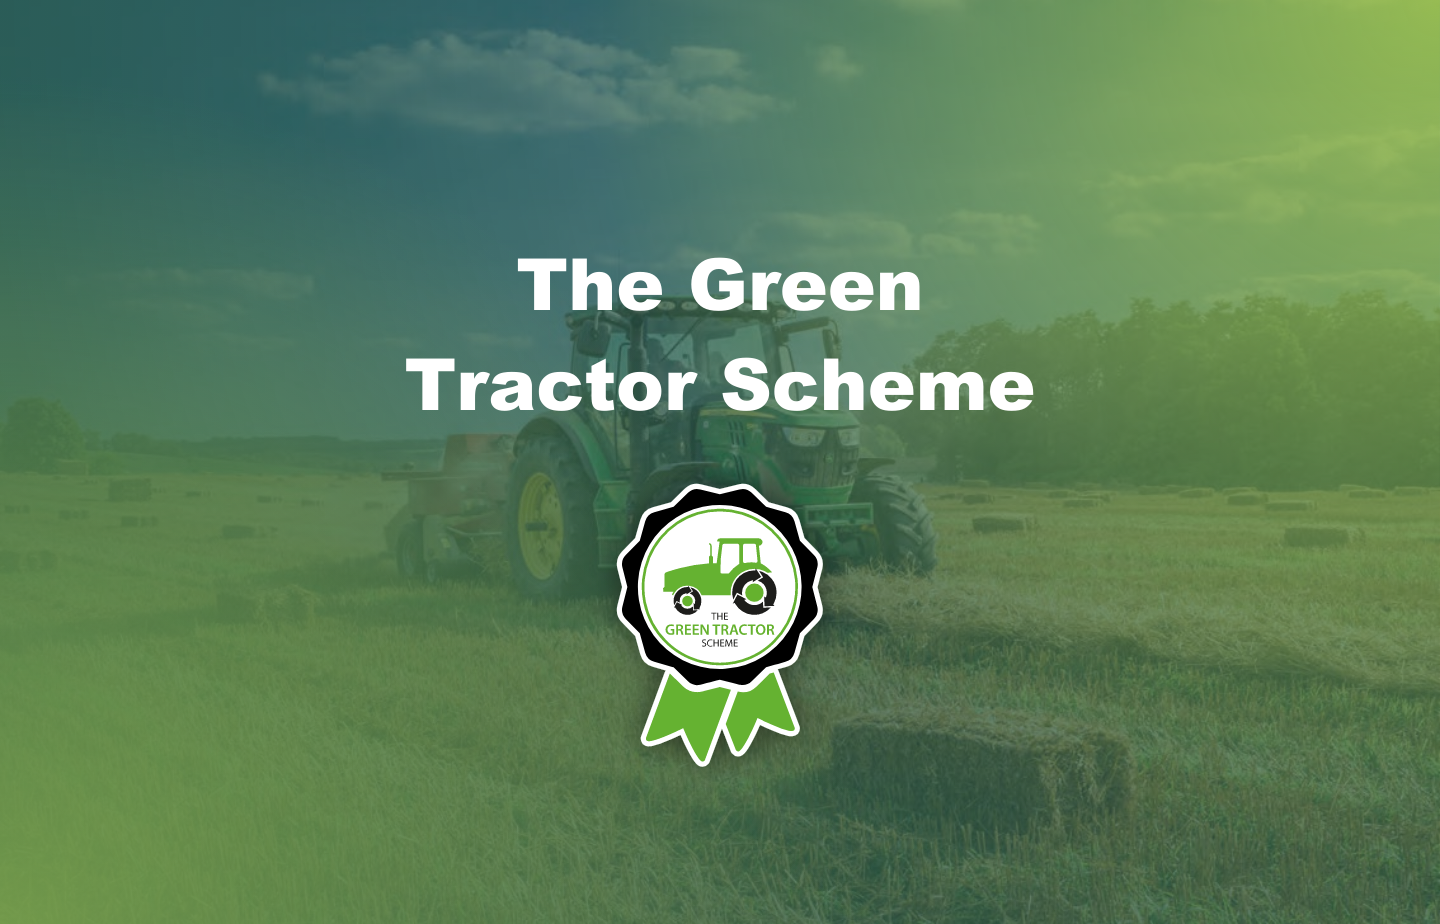 We have joined the Green Tractor Scheme